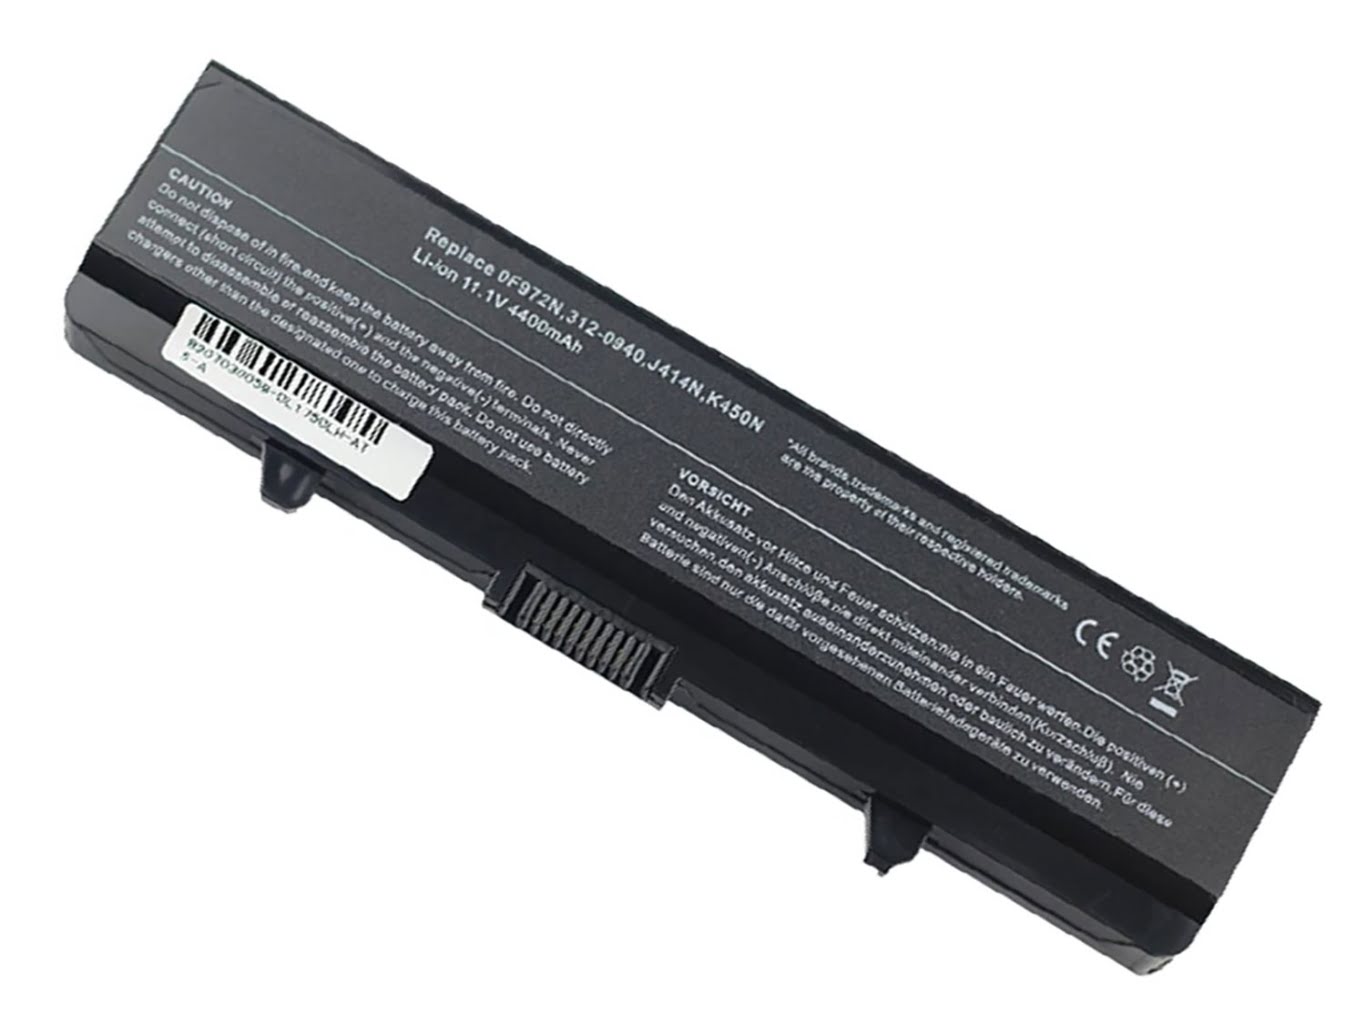 Dell 0f972n, 0g558n Laptop Battery For Inspiron 1440, Inspiron 1440n replacement